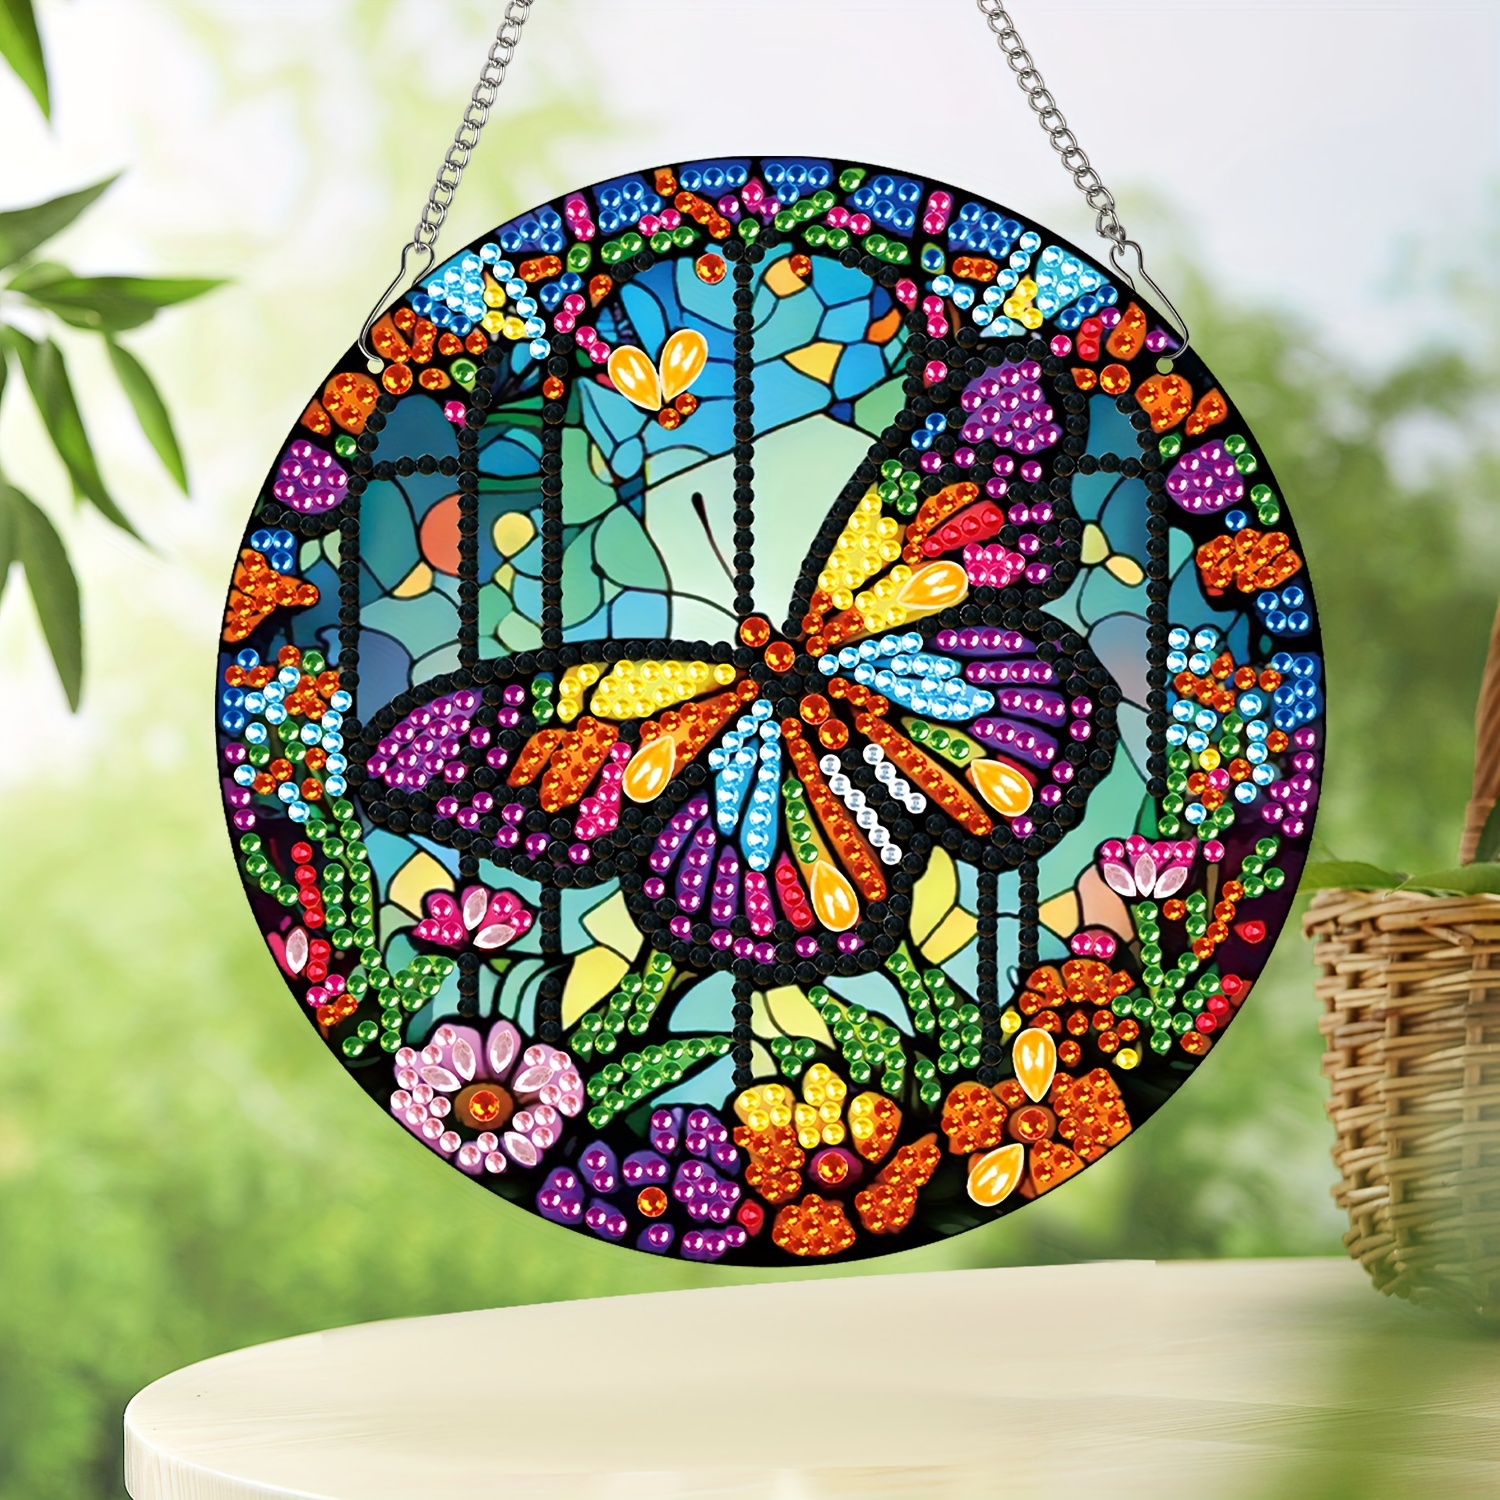 Stained Glass Butterfly - Diamond Painting Kit